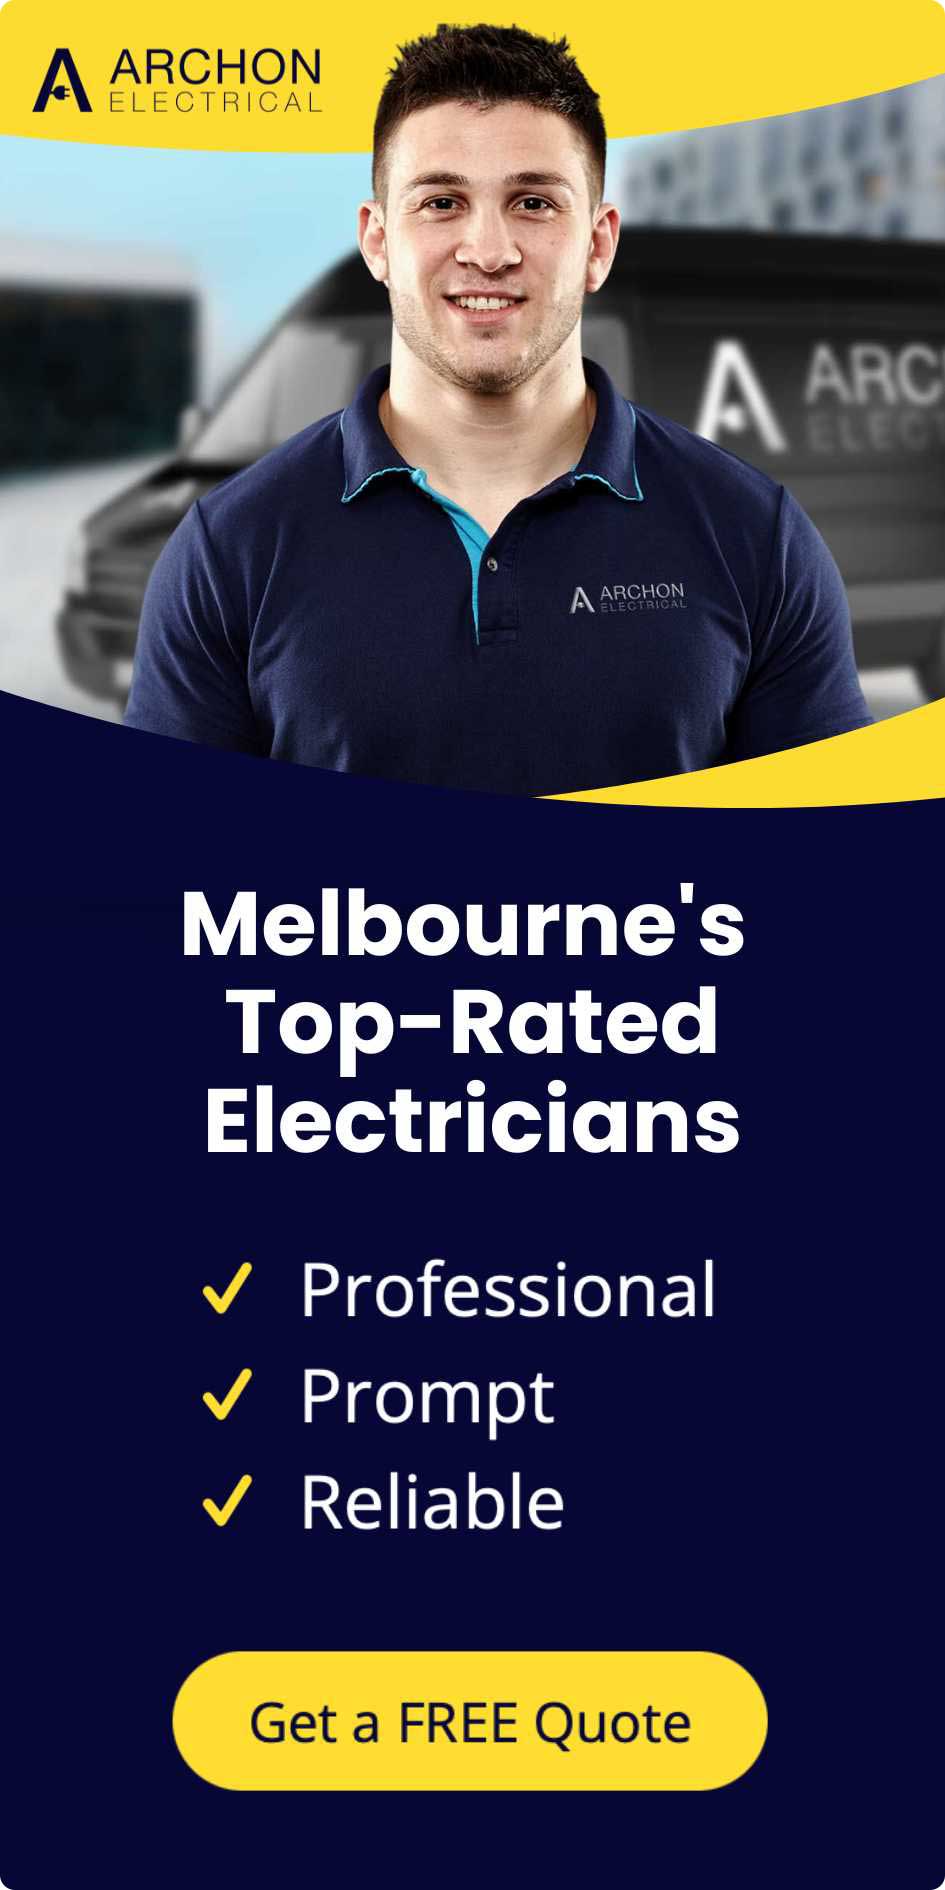 Licensed Electrician Melbourne - Archon Electrical Free Online Quote